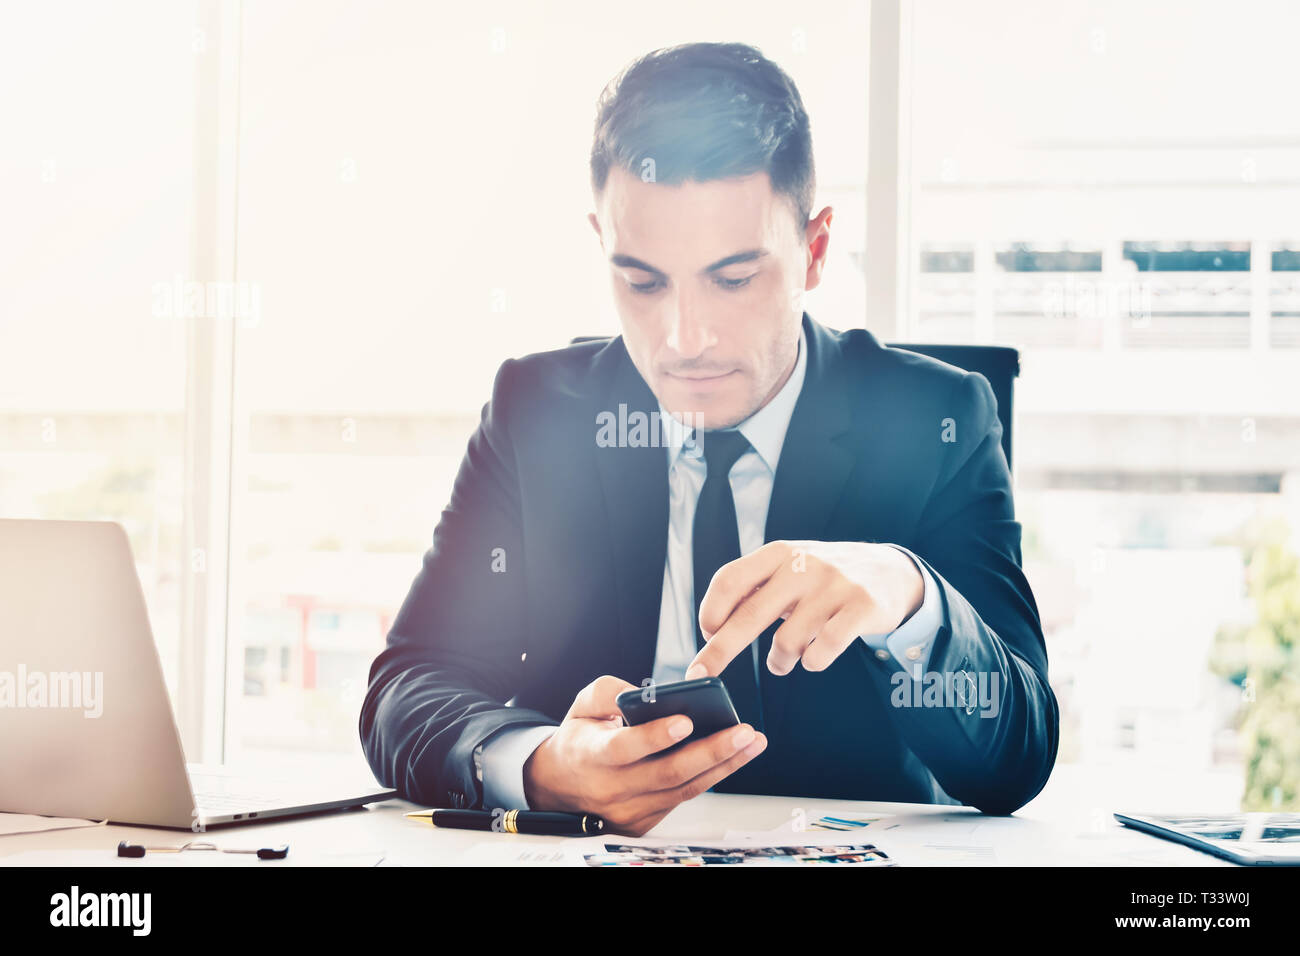 Manager searching online informations and data for business in bright modern office Stock Photo